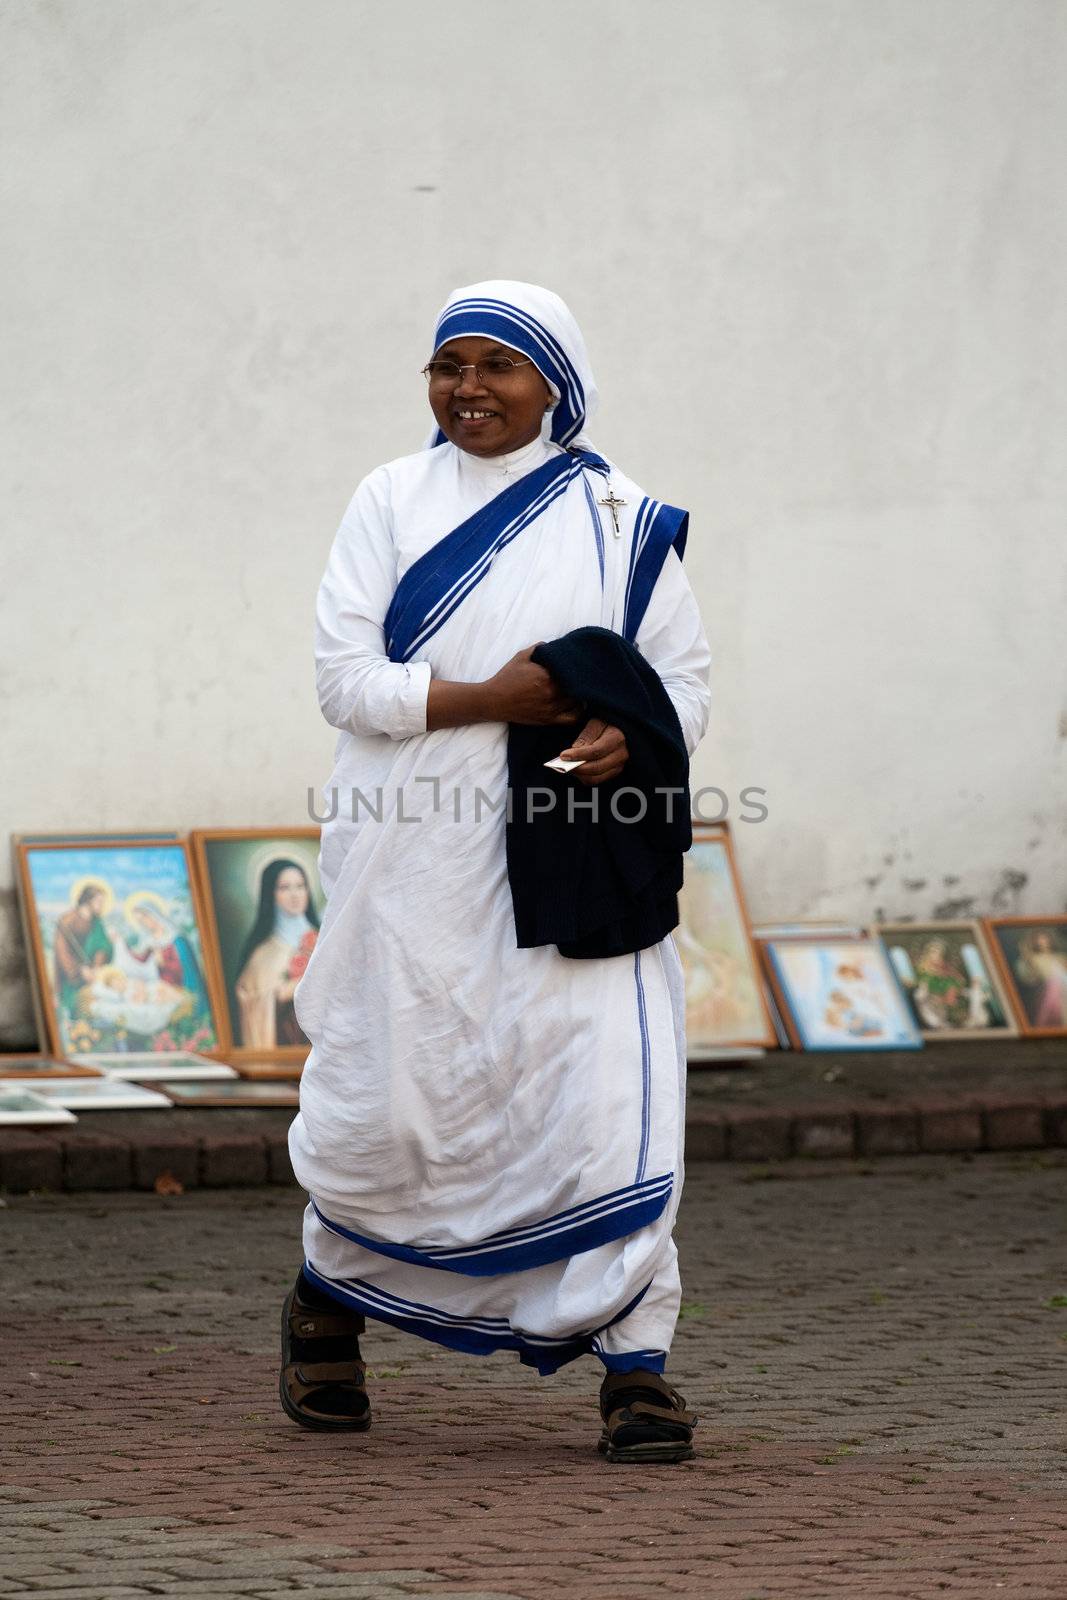 AGLONA, LATVIA - AUGUST 15: Sister of Missionaries of Charity at the celebration of the Assumption of the Virgin Mary in Aglona, Latvia, August 15, 2008.